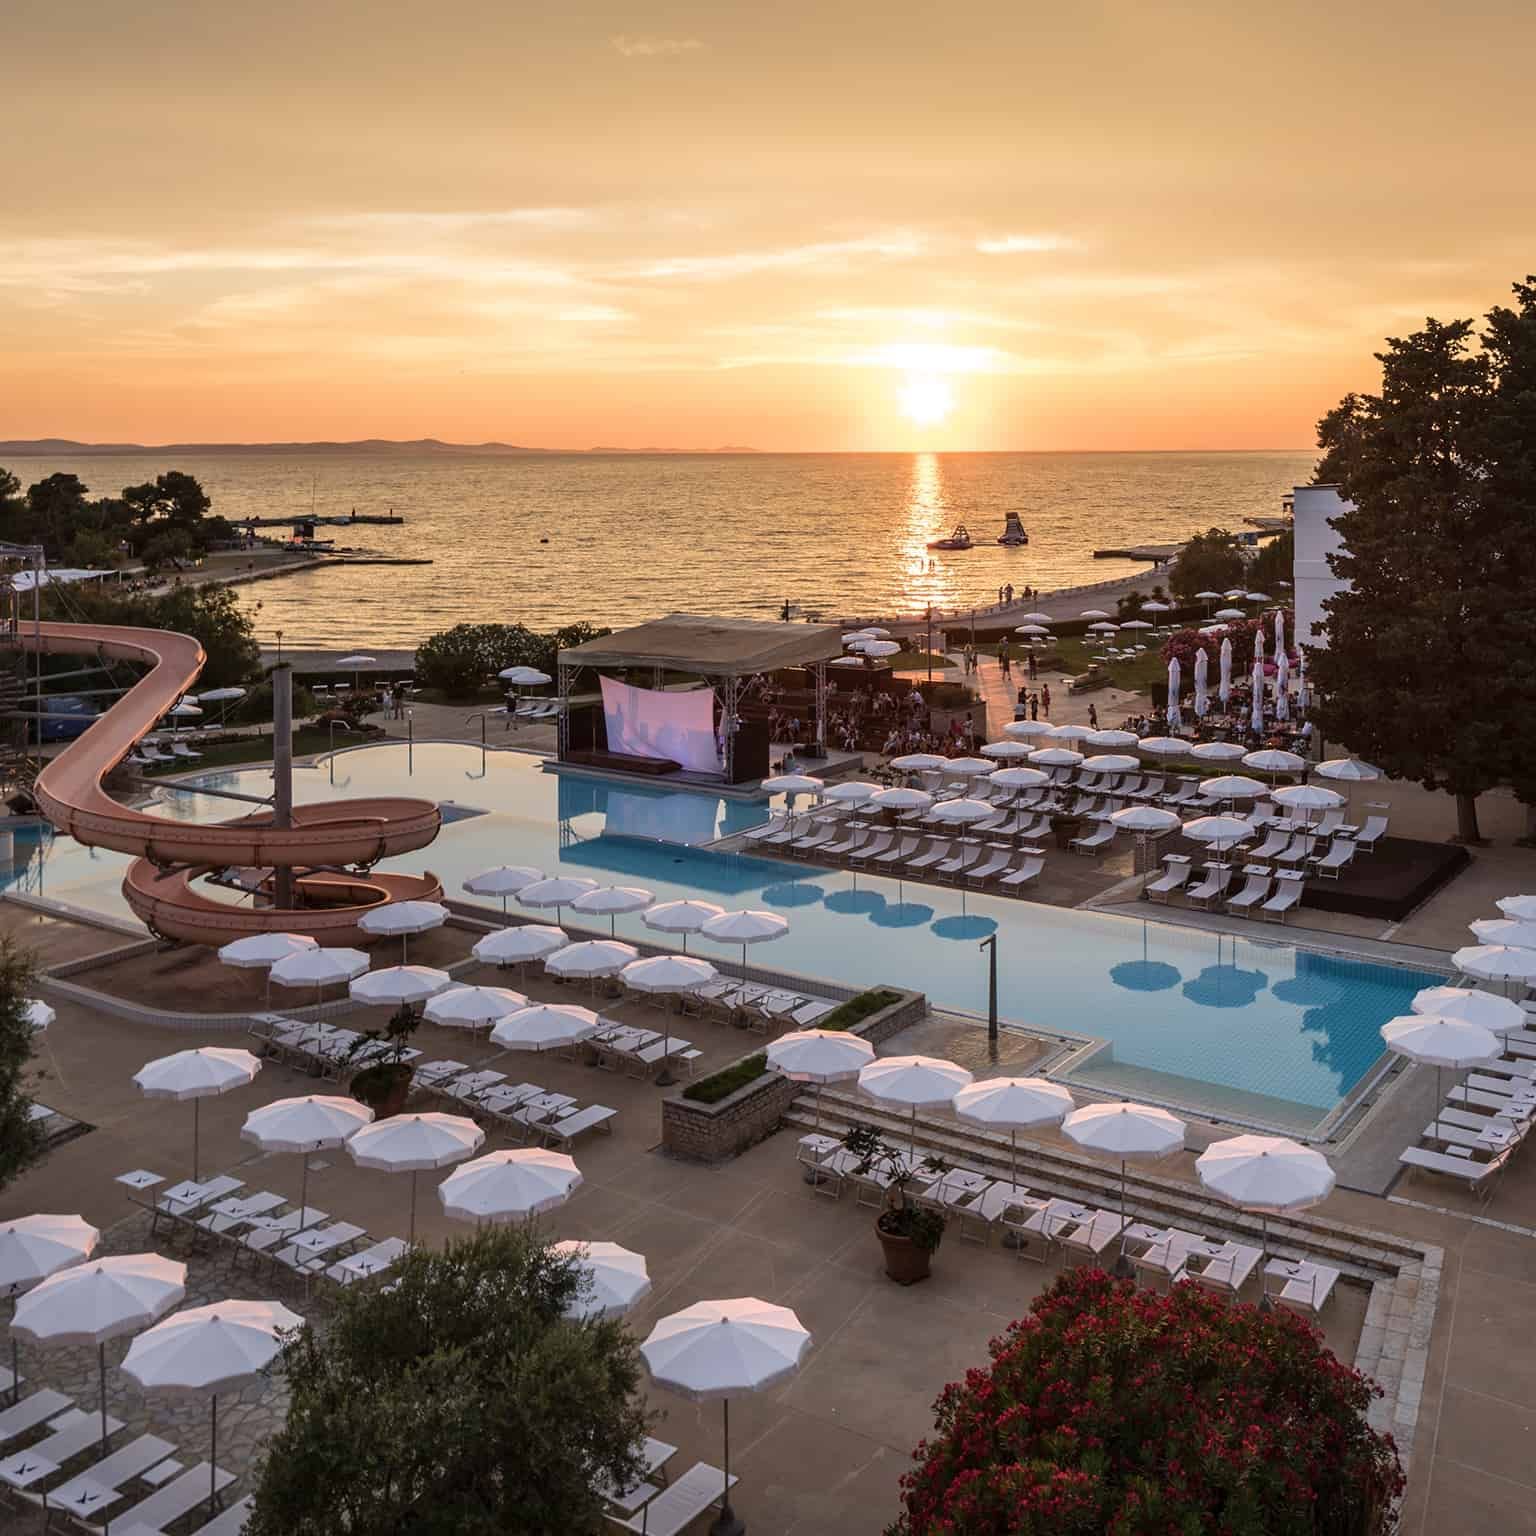 Outdoor Pool & nearby sea at sunset, Falkensteiner Hotels